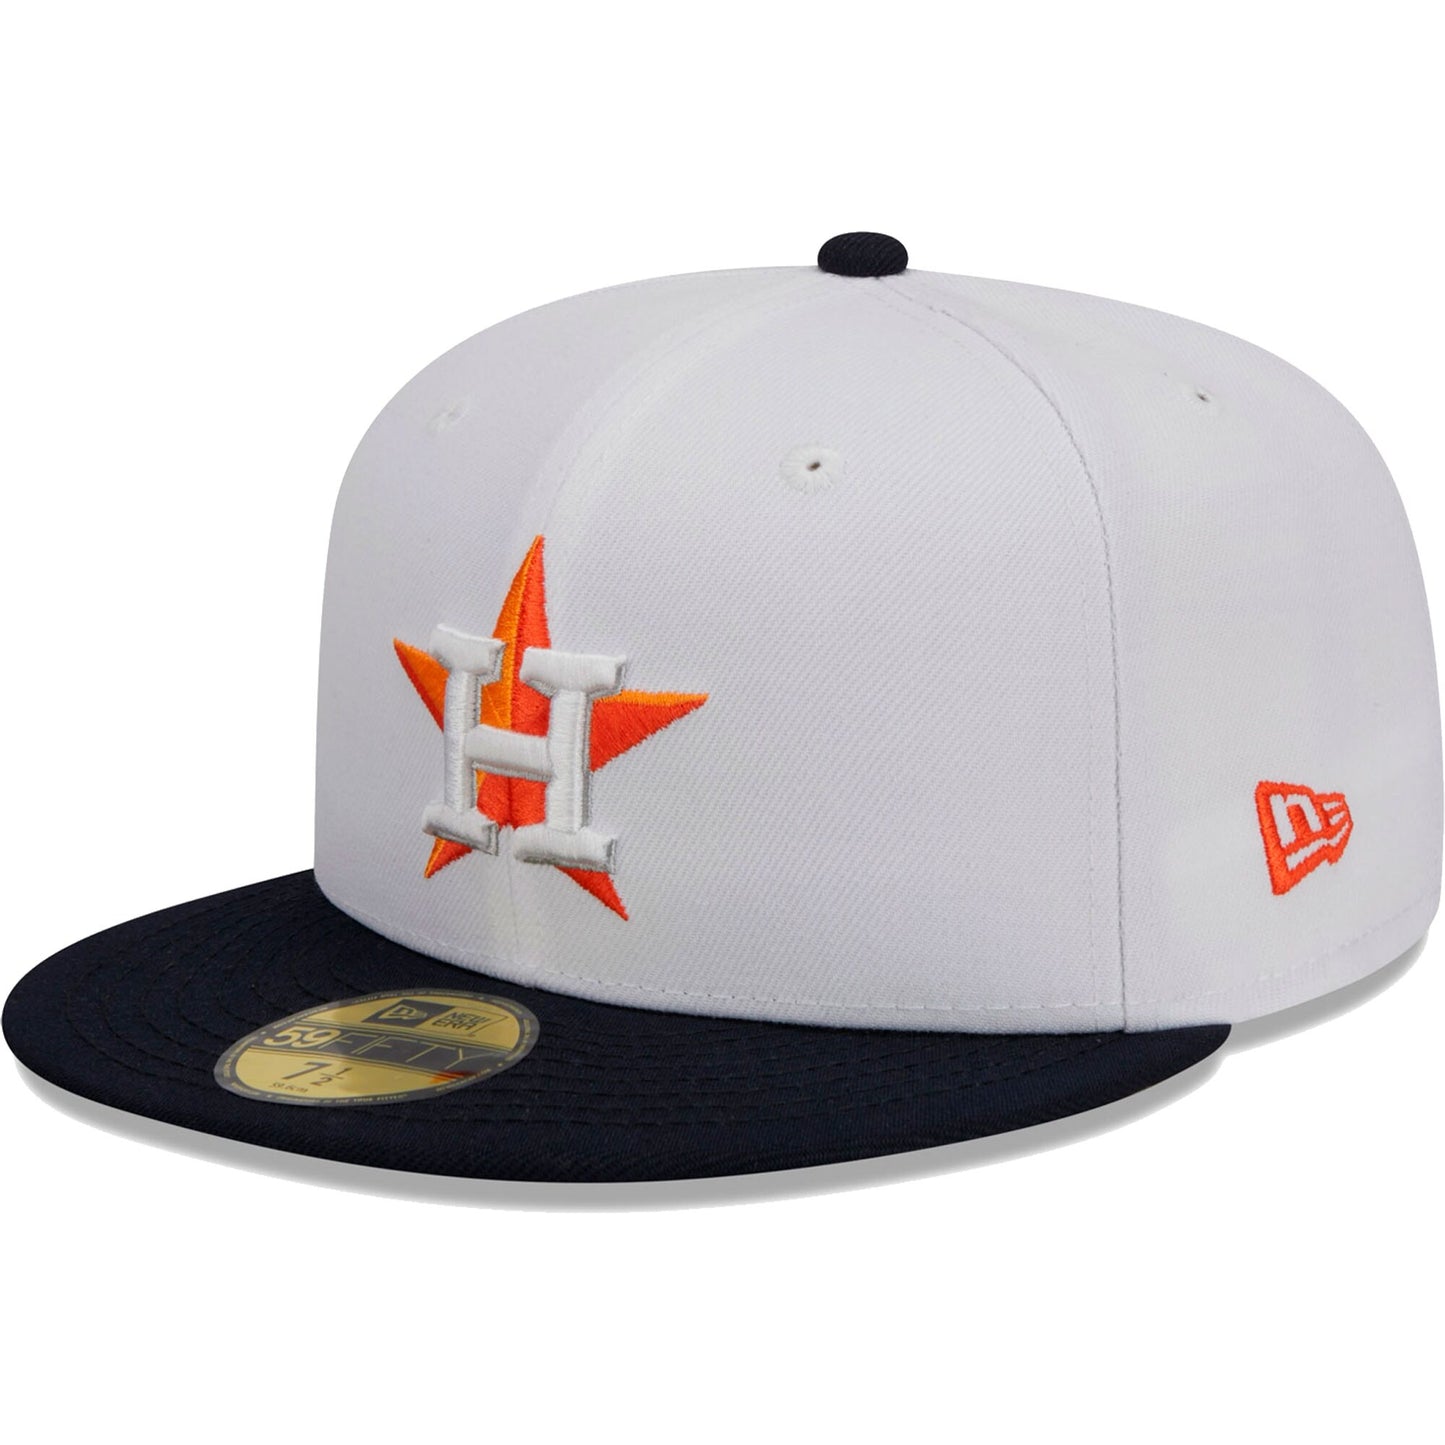 Houston Astros New Era Optic 59FIFTY Fitted Hat - White/Navy